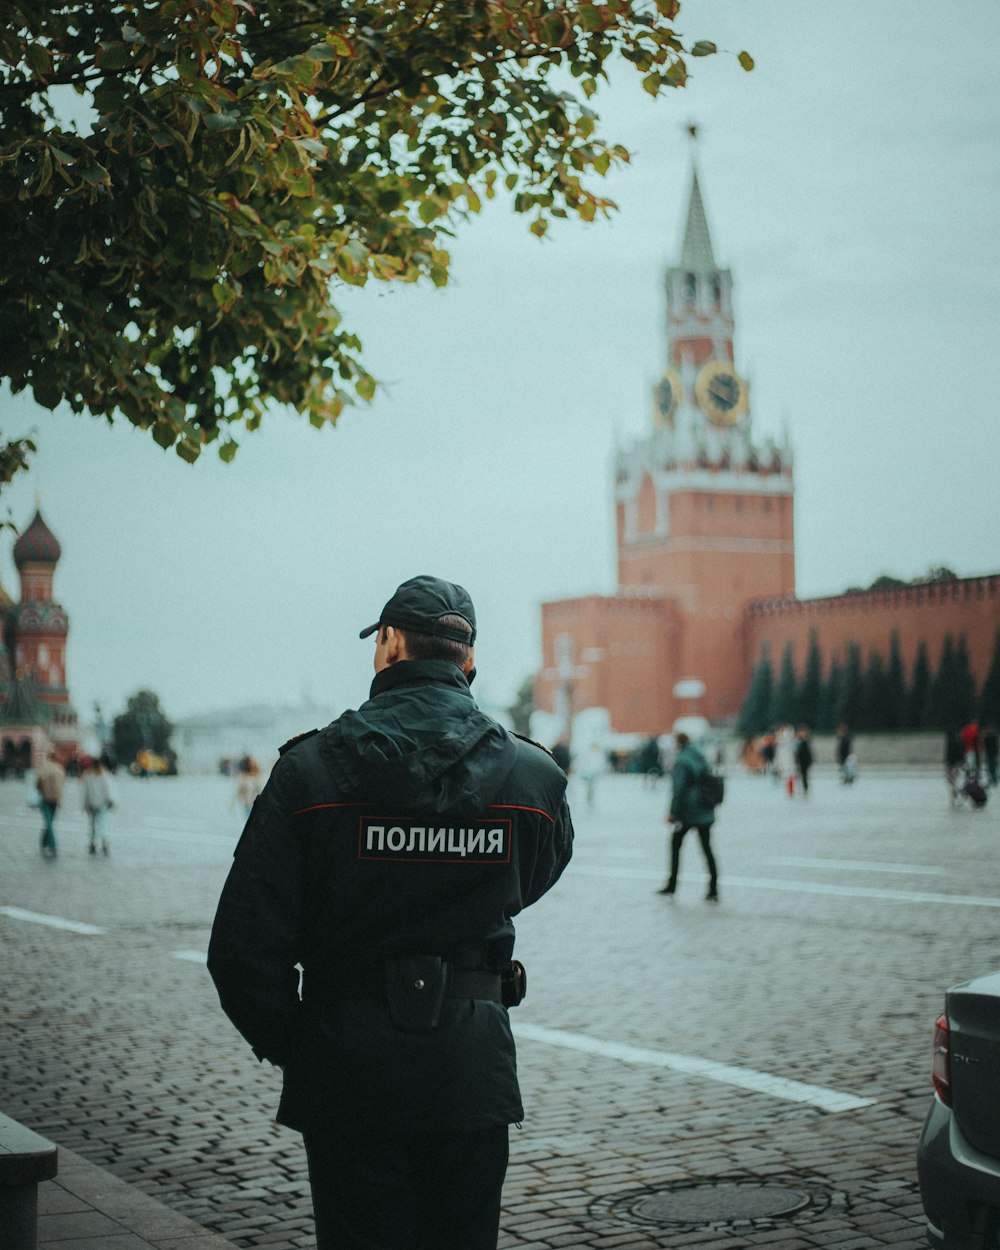 a police officer standing in front of a building